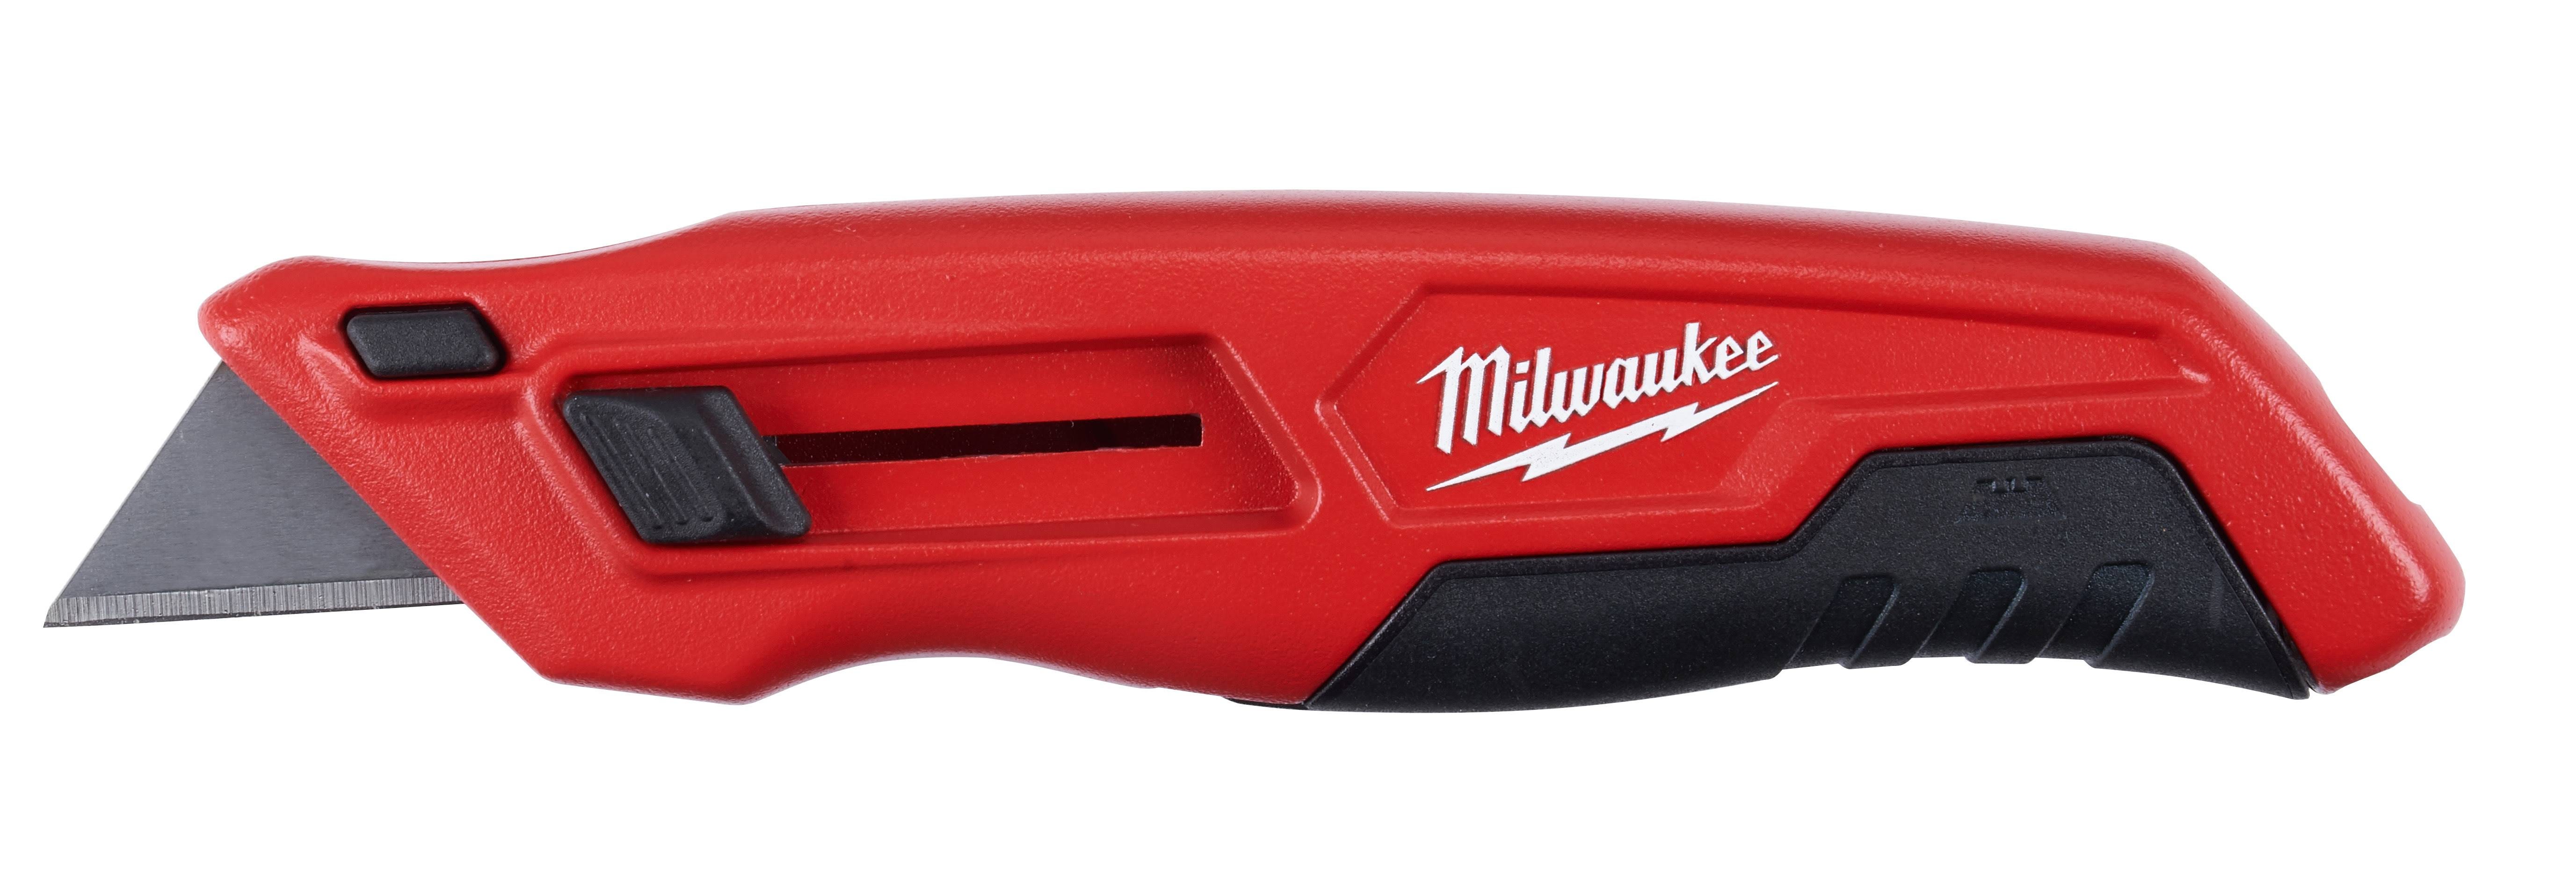 Milwaukee Side Slide Utility Knife with Slide Button and Blade Storage | Image